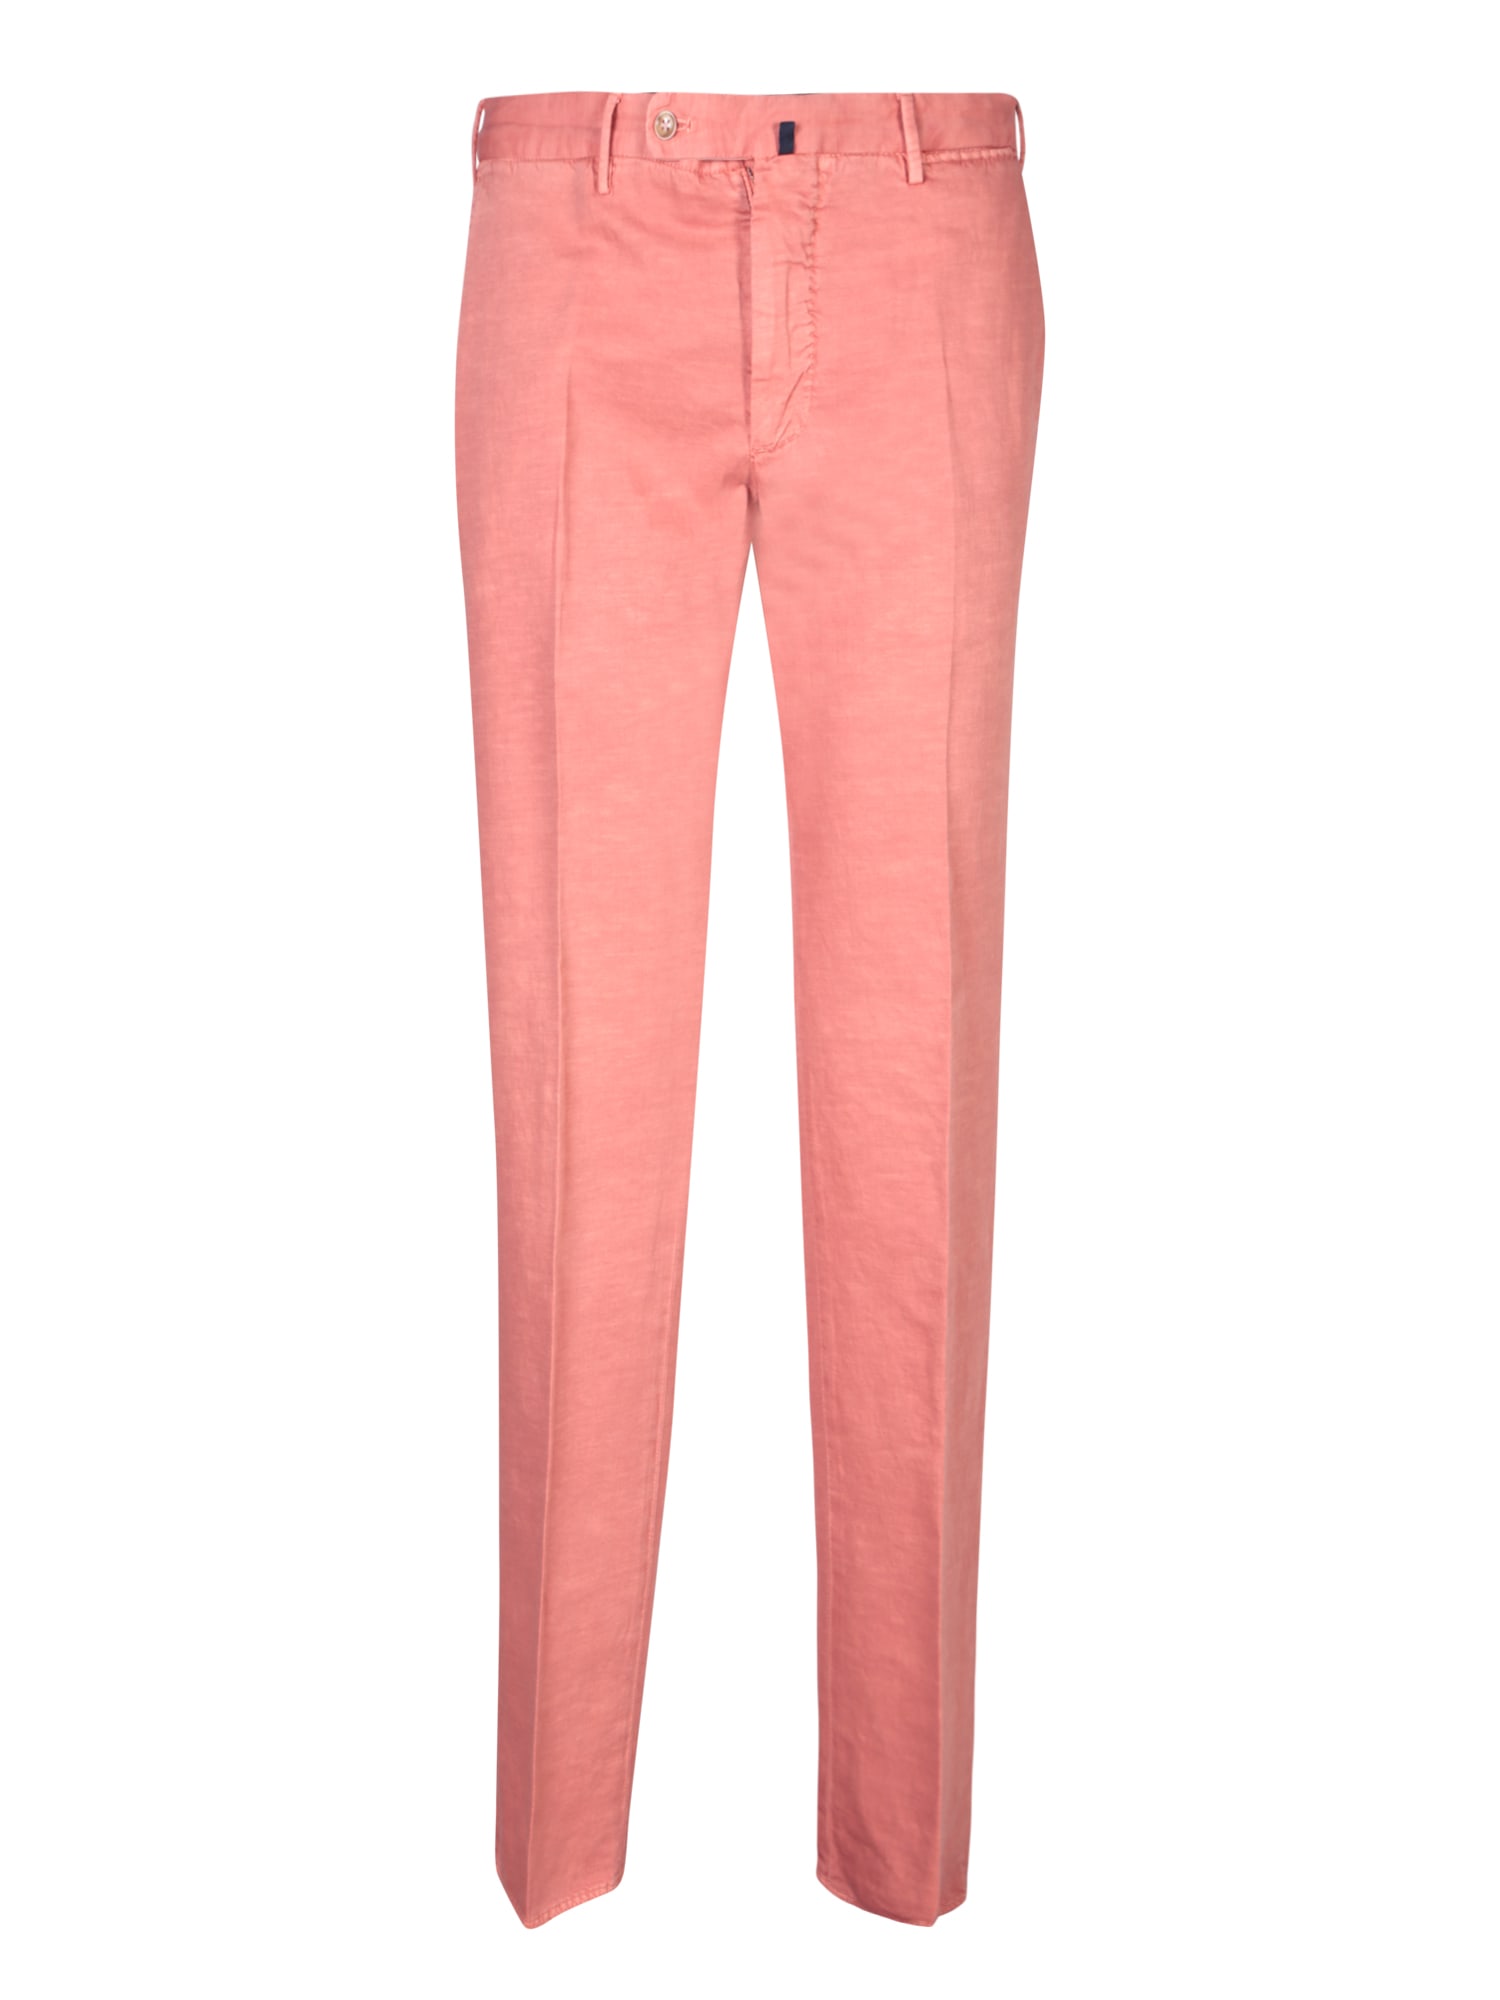 Shop Incotex Pink Chino Linen Trousers By